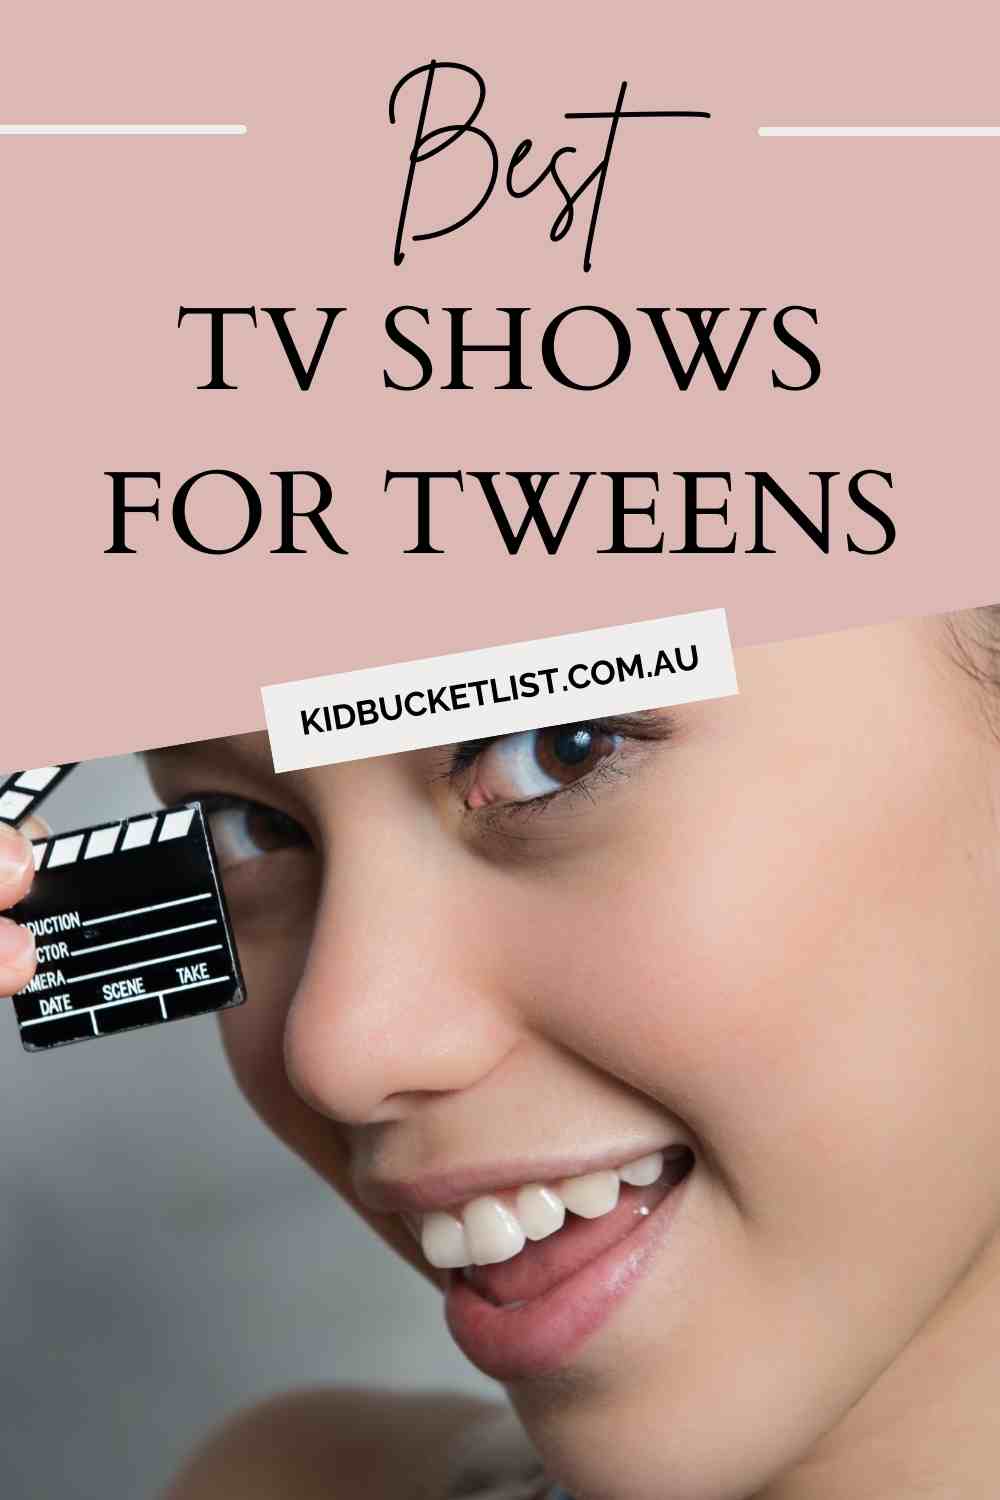 Best TV shows to watch with tweens and teens